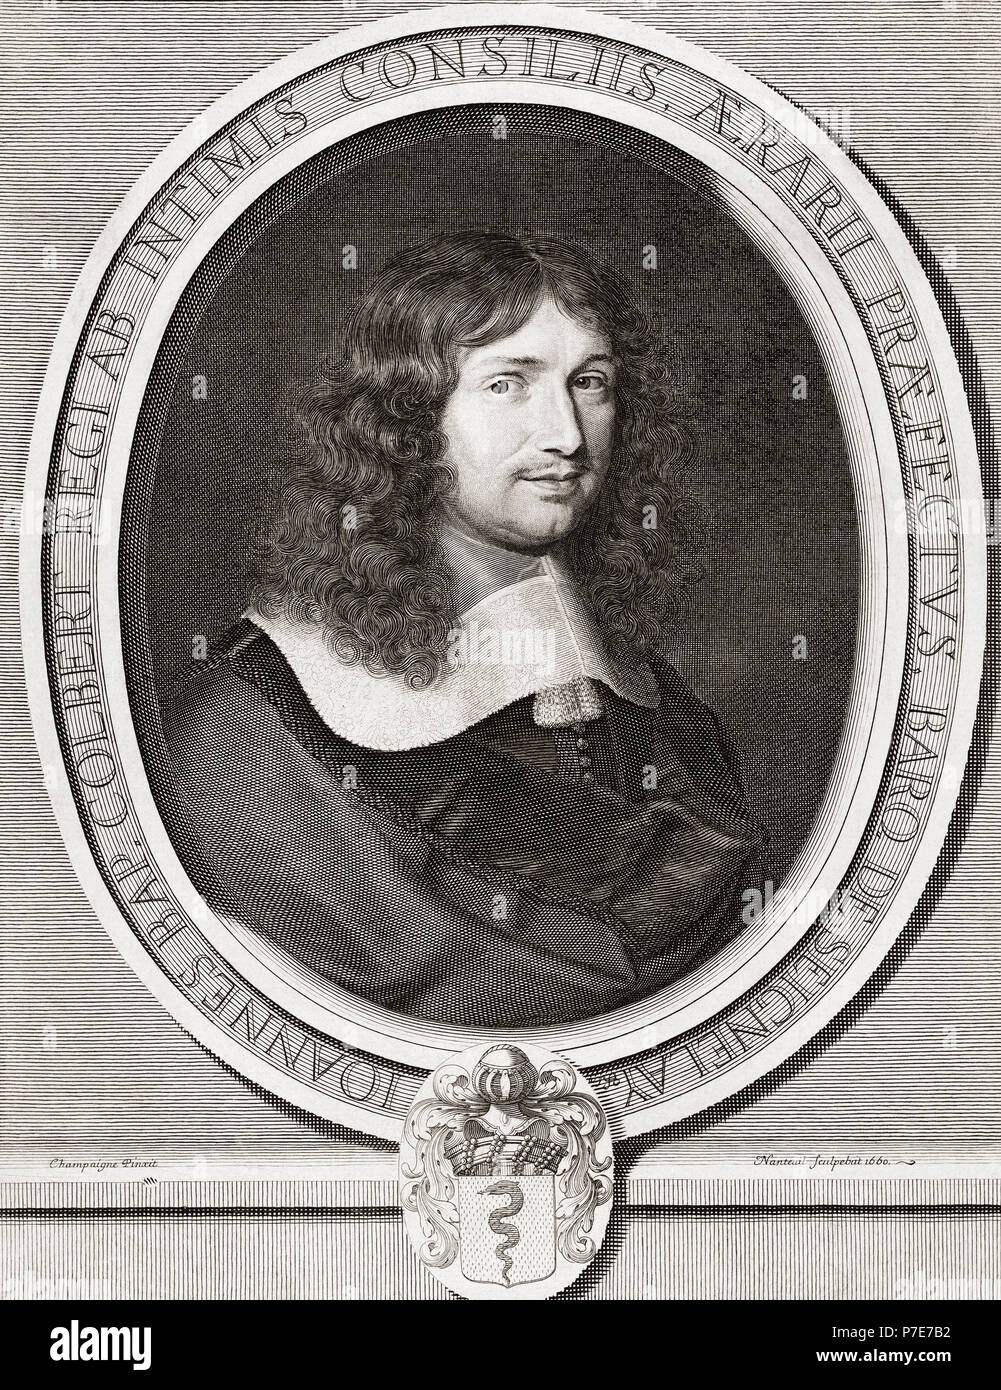 Jean Baptiste Colbert, 1619-1683.  French controller general of finance from 1665 and secretary of state for the navy from1668 under Louis XIV.  After a contemporary engraving. Stock Photo